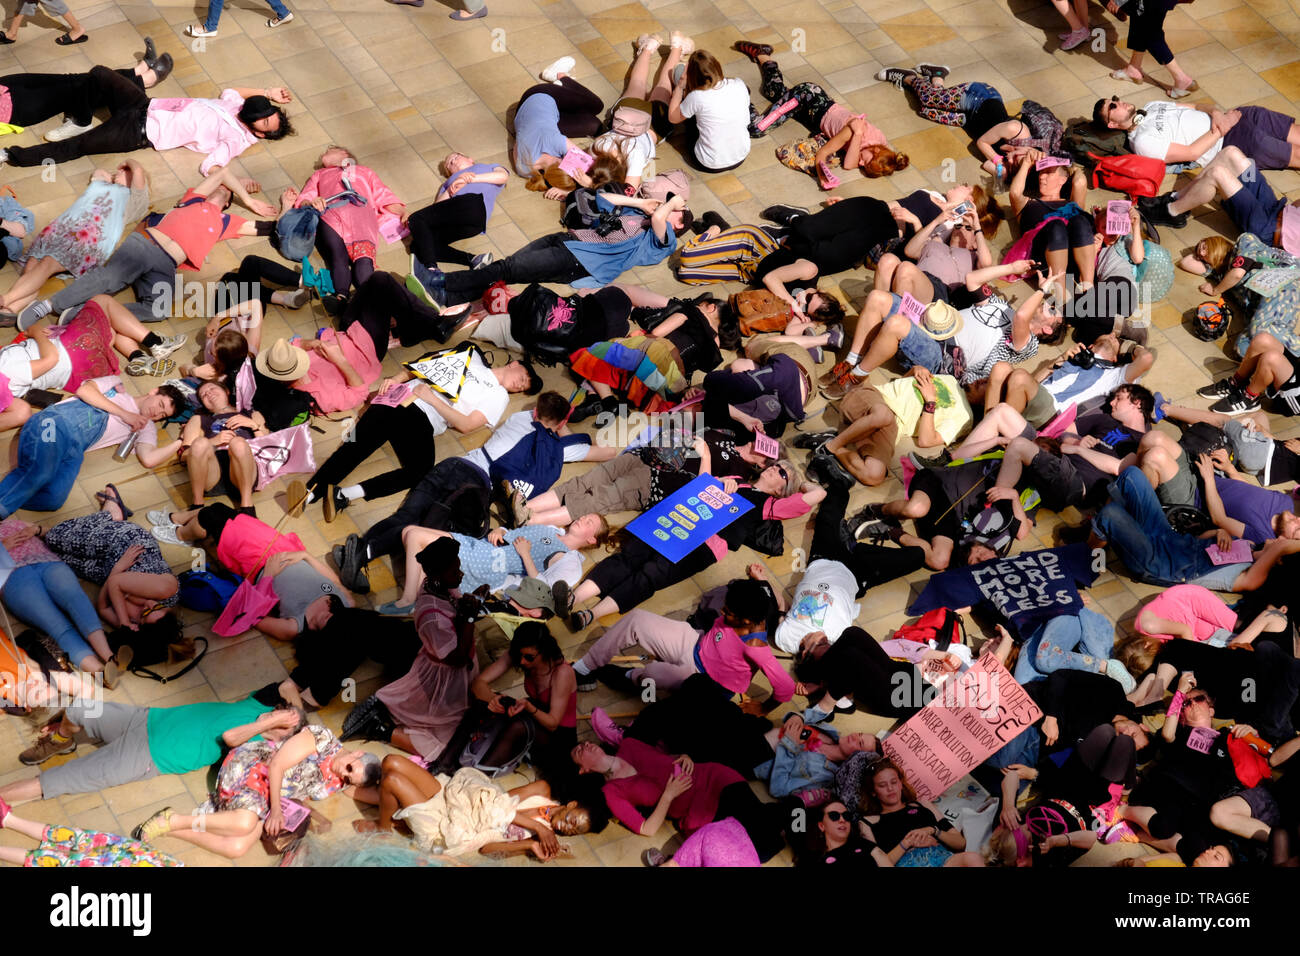 Bristol, UK, 1st June 2019. Campaigners from Extinction Rebellion are disrupting the Bristol shopping areas of Broadmead and Cabot circus to highlight the impact disposable fashion makes upon the environment. The campaigners are encouraging people to buy no new clothes for a year.  Credit: Mr Standfast/Alamy Live News Stock Photo